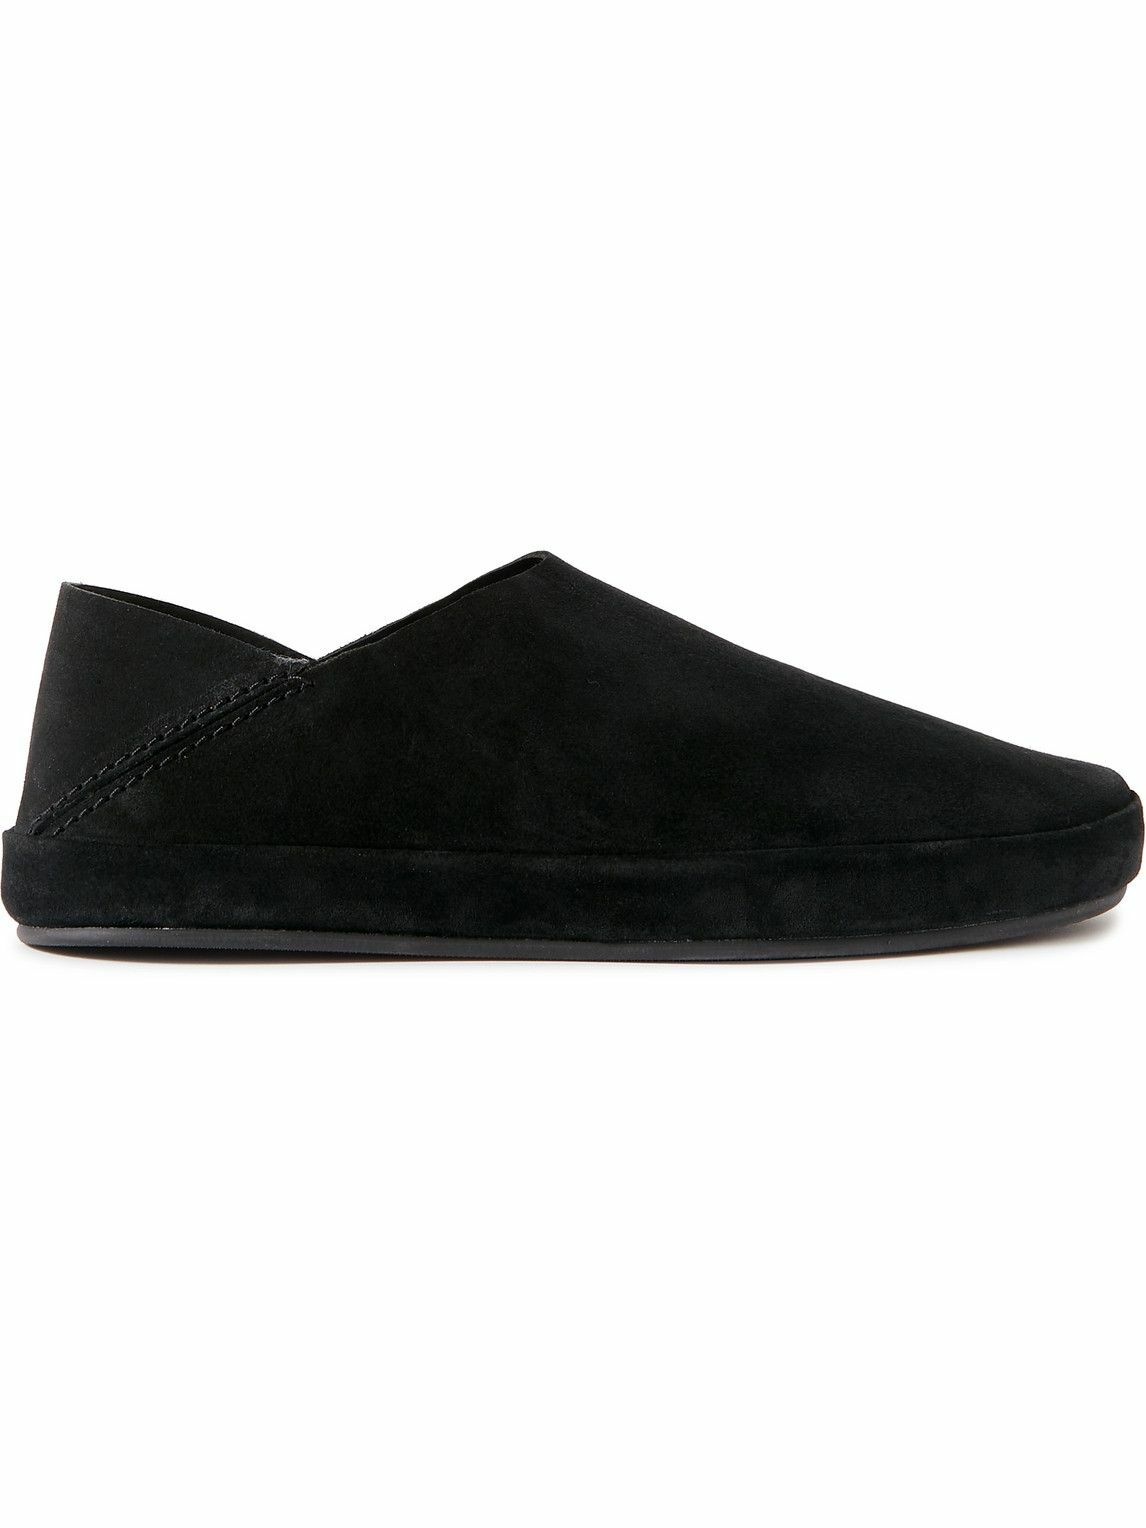 Photo: Mulo - Collapsible-Heel Suede Loafers - Black